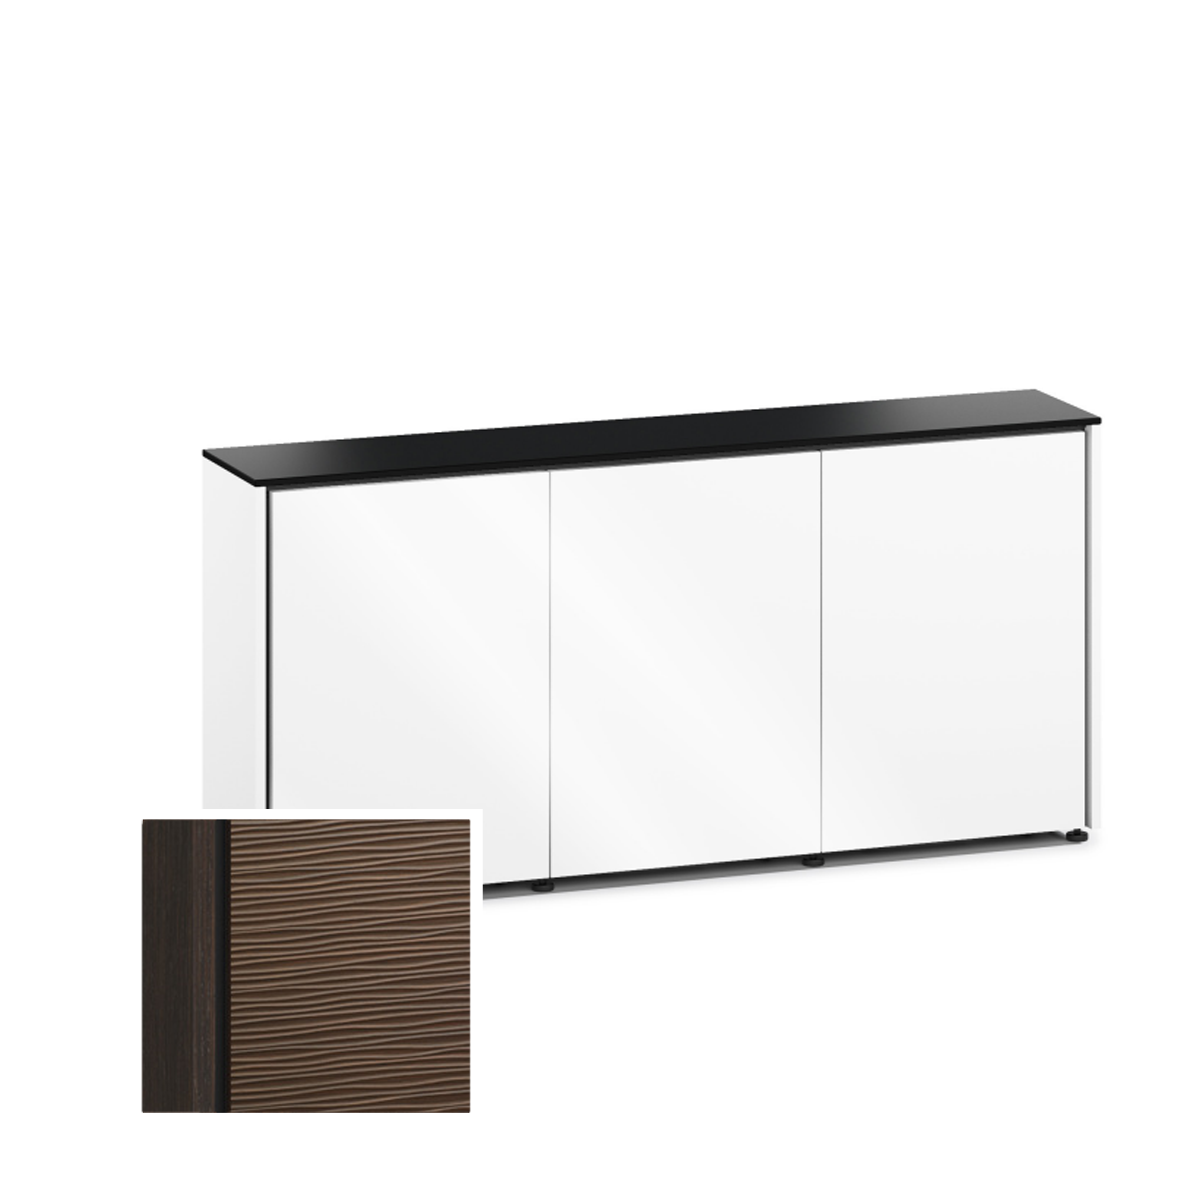 D1/337A/BL/WE 3 Bay Low-Profile, Wall Cabinet, Berlin/Wave Texture- Wenge